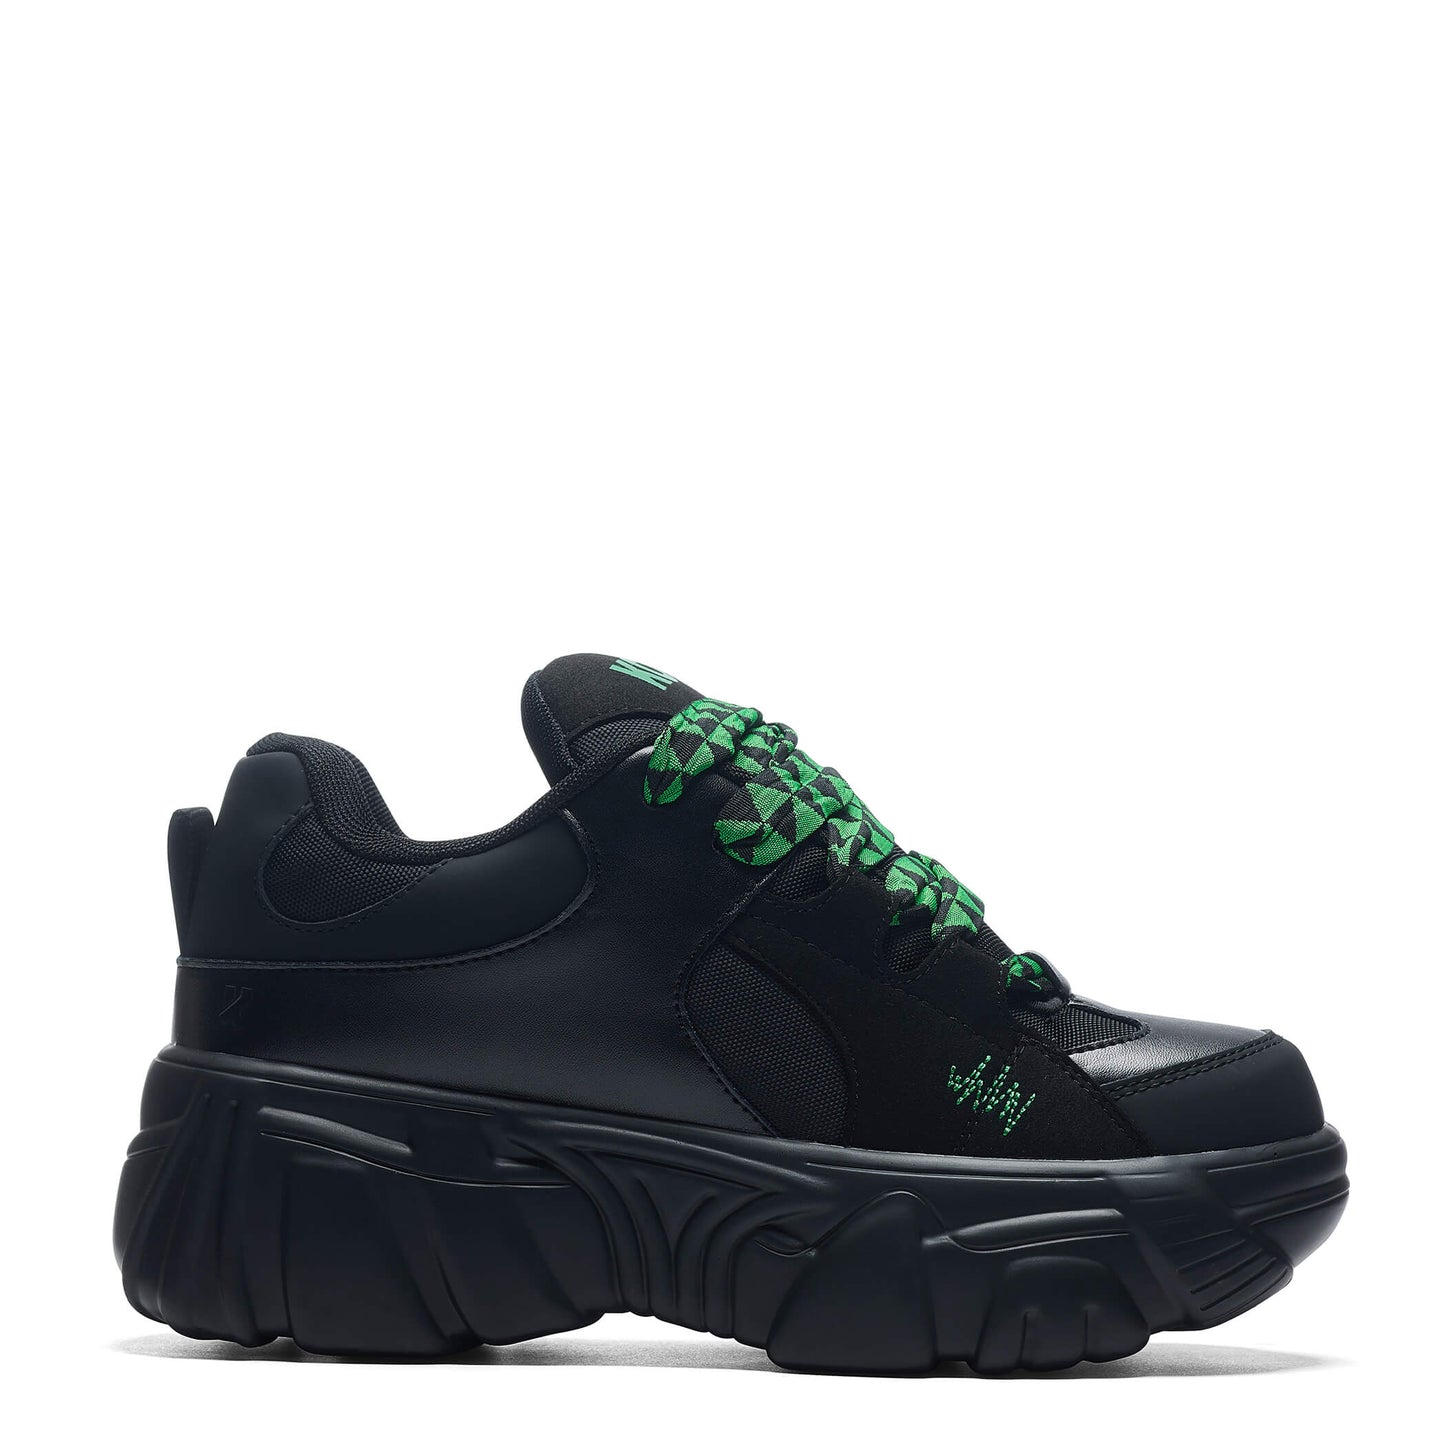 Ricta Flip Chunky Trainers - Green Lace - Trainers - KOI Footwear - Black - Main View